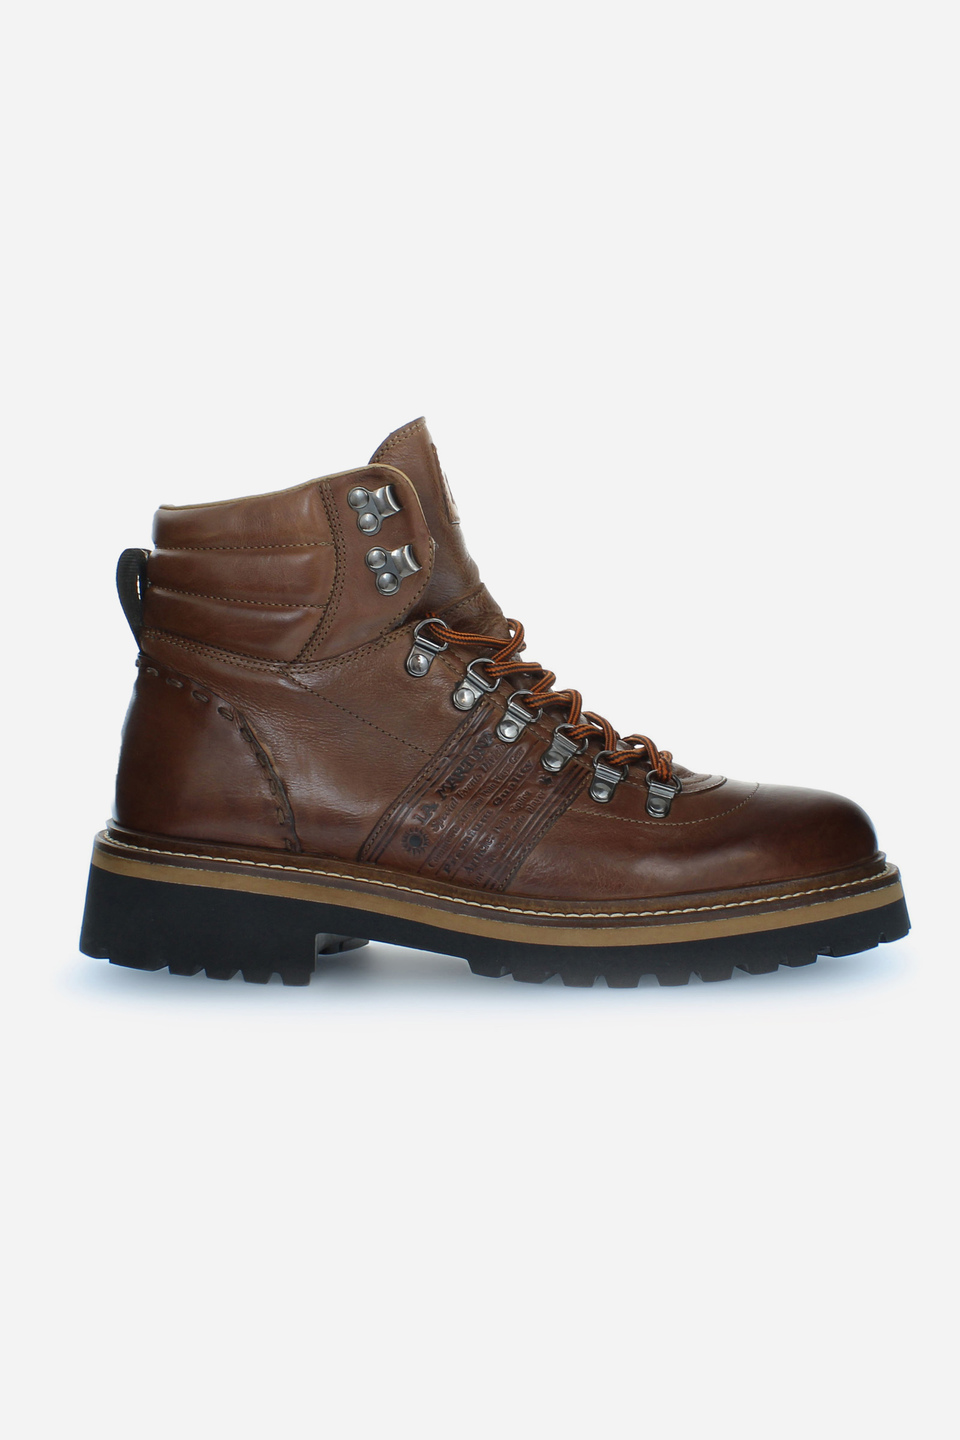 Men's urban style ankle boot in leather | La Martina - Official Online Shop